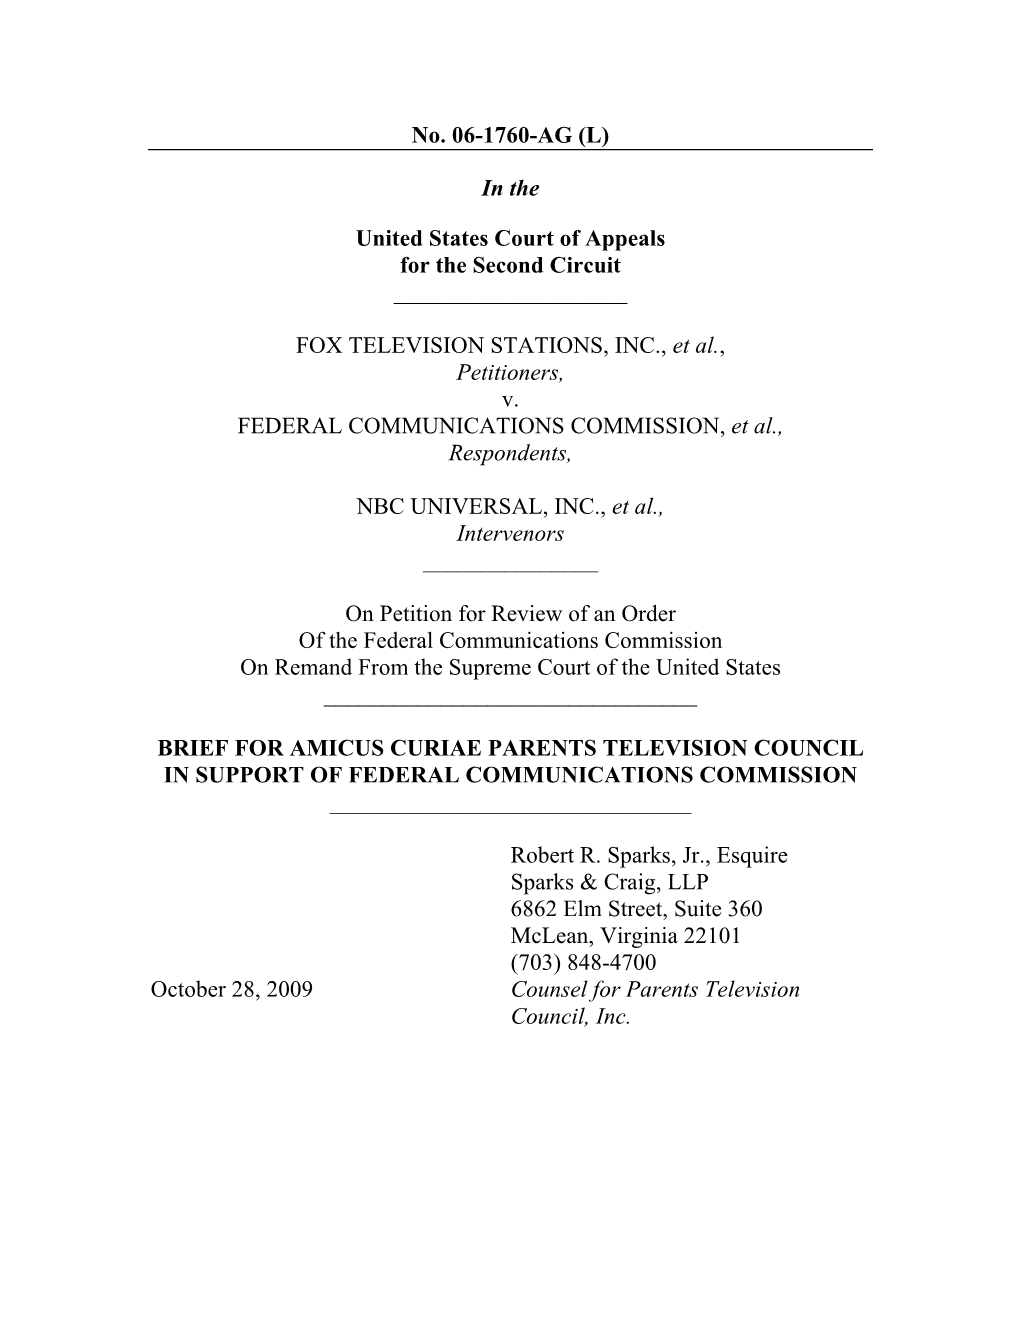 FOX TELEVISION STATIONS, INC., Et Al., Petitioners, V